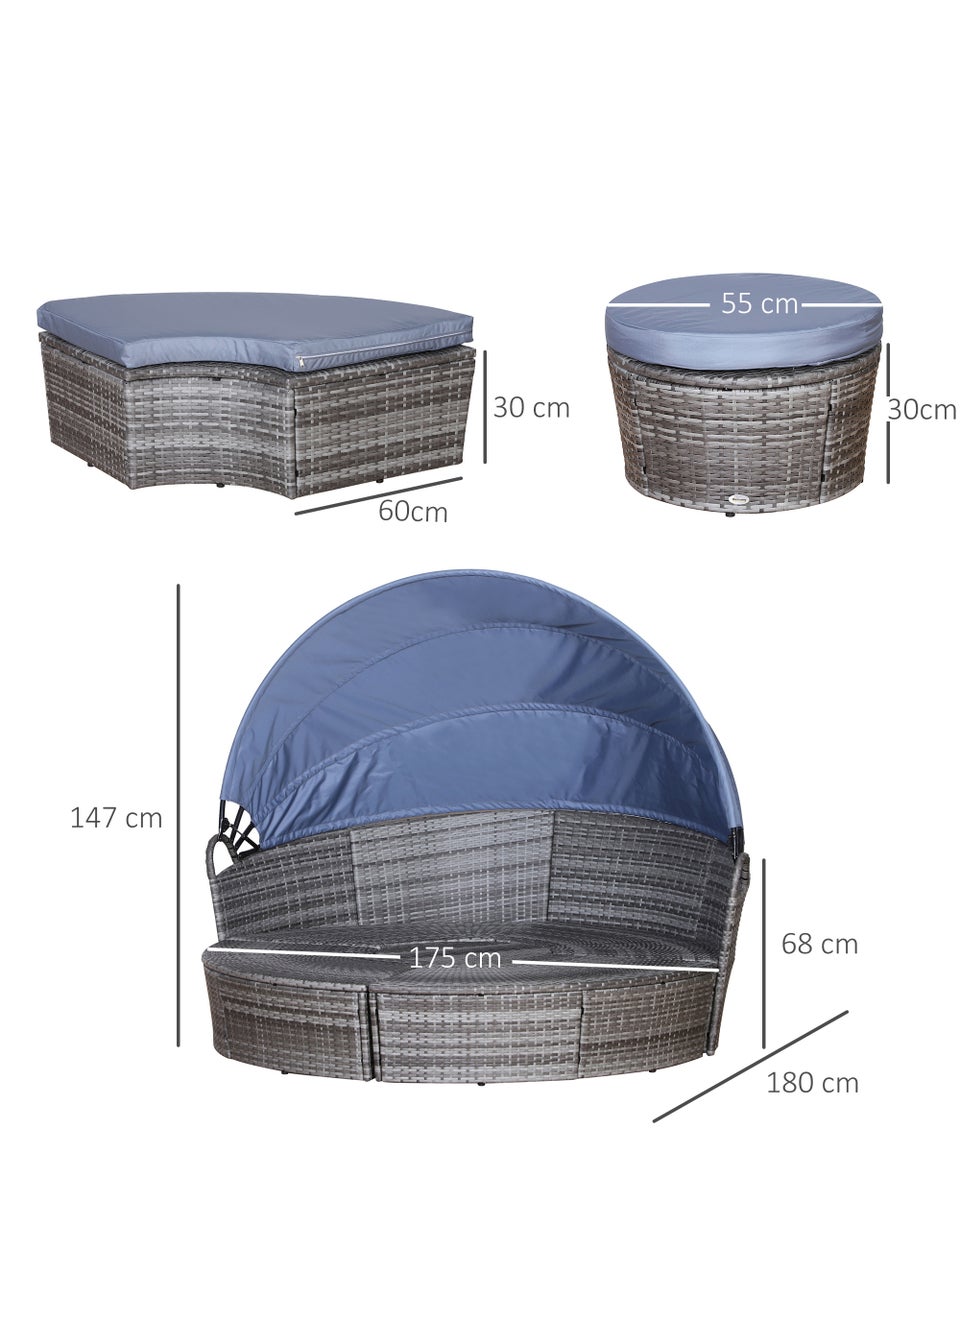 Outsunny 4 Piece Cushioned Outdoor Rattan Round Sofa Bed Set